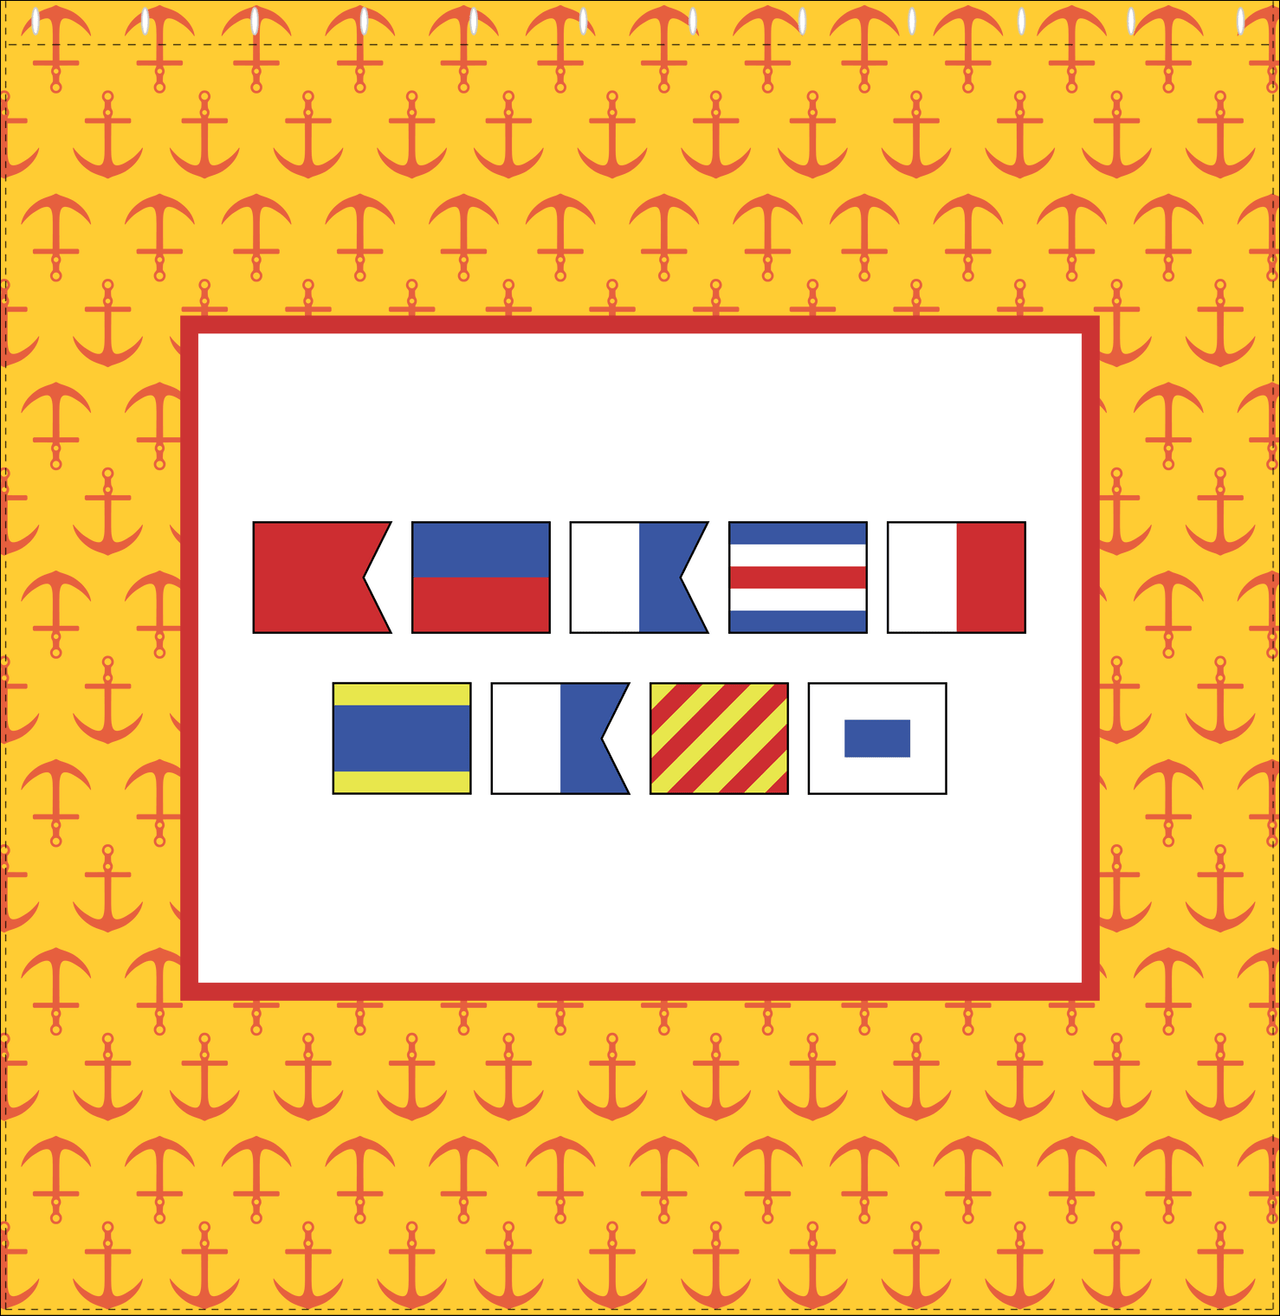 Personalized Nautical Flags Shower Curtain with Anchors - Yellow and Red - Flags without Letters - Decorate View